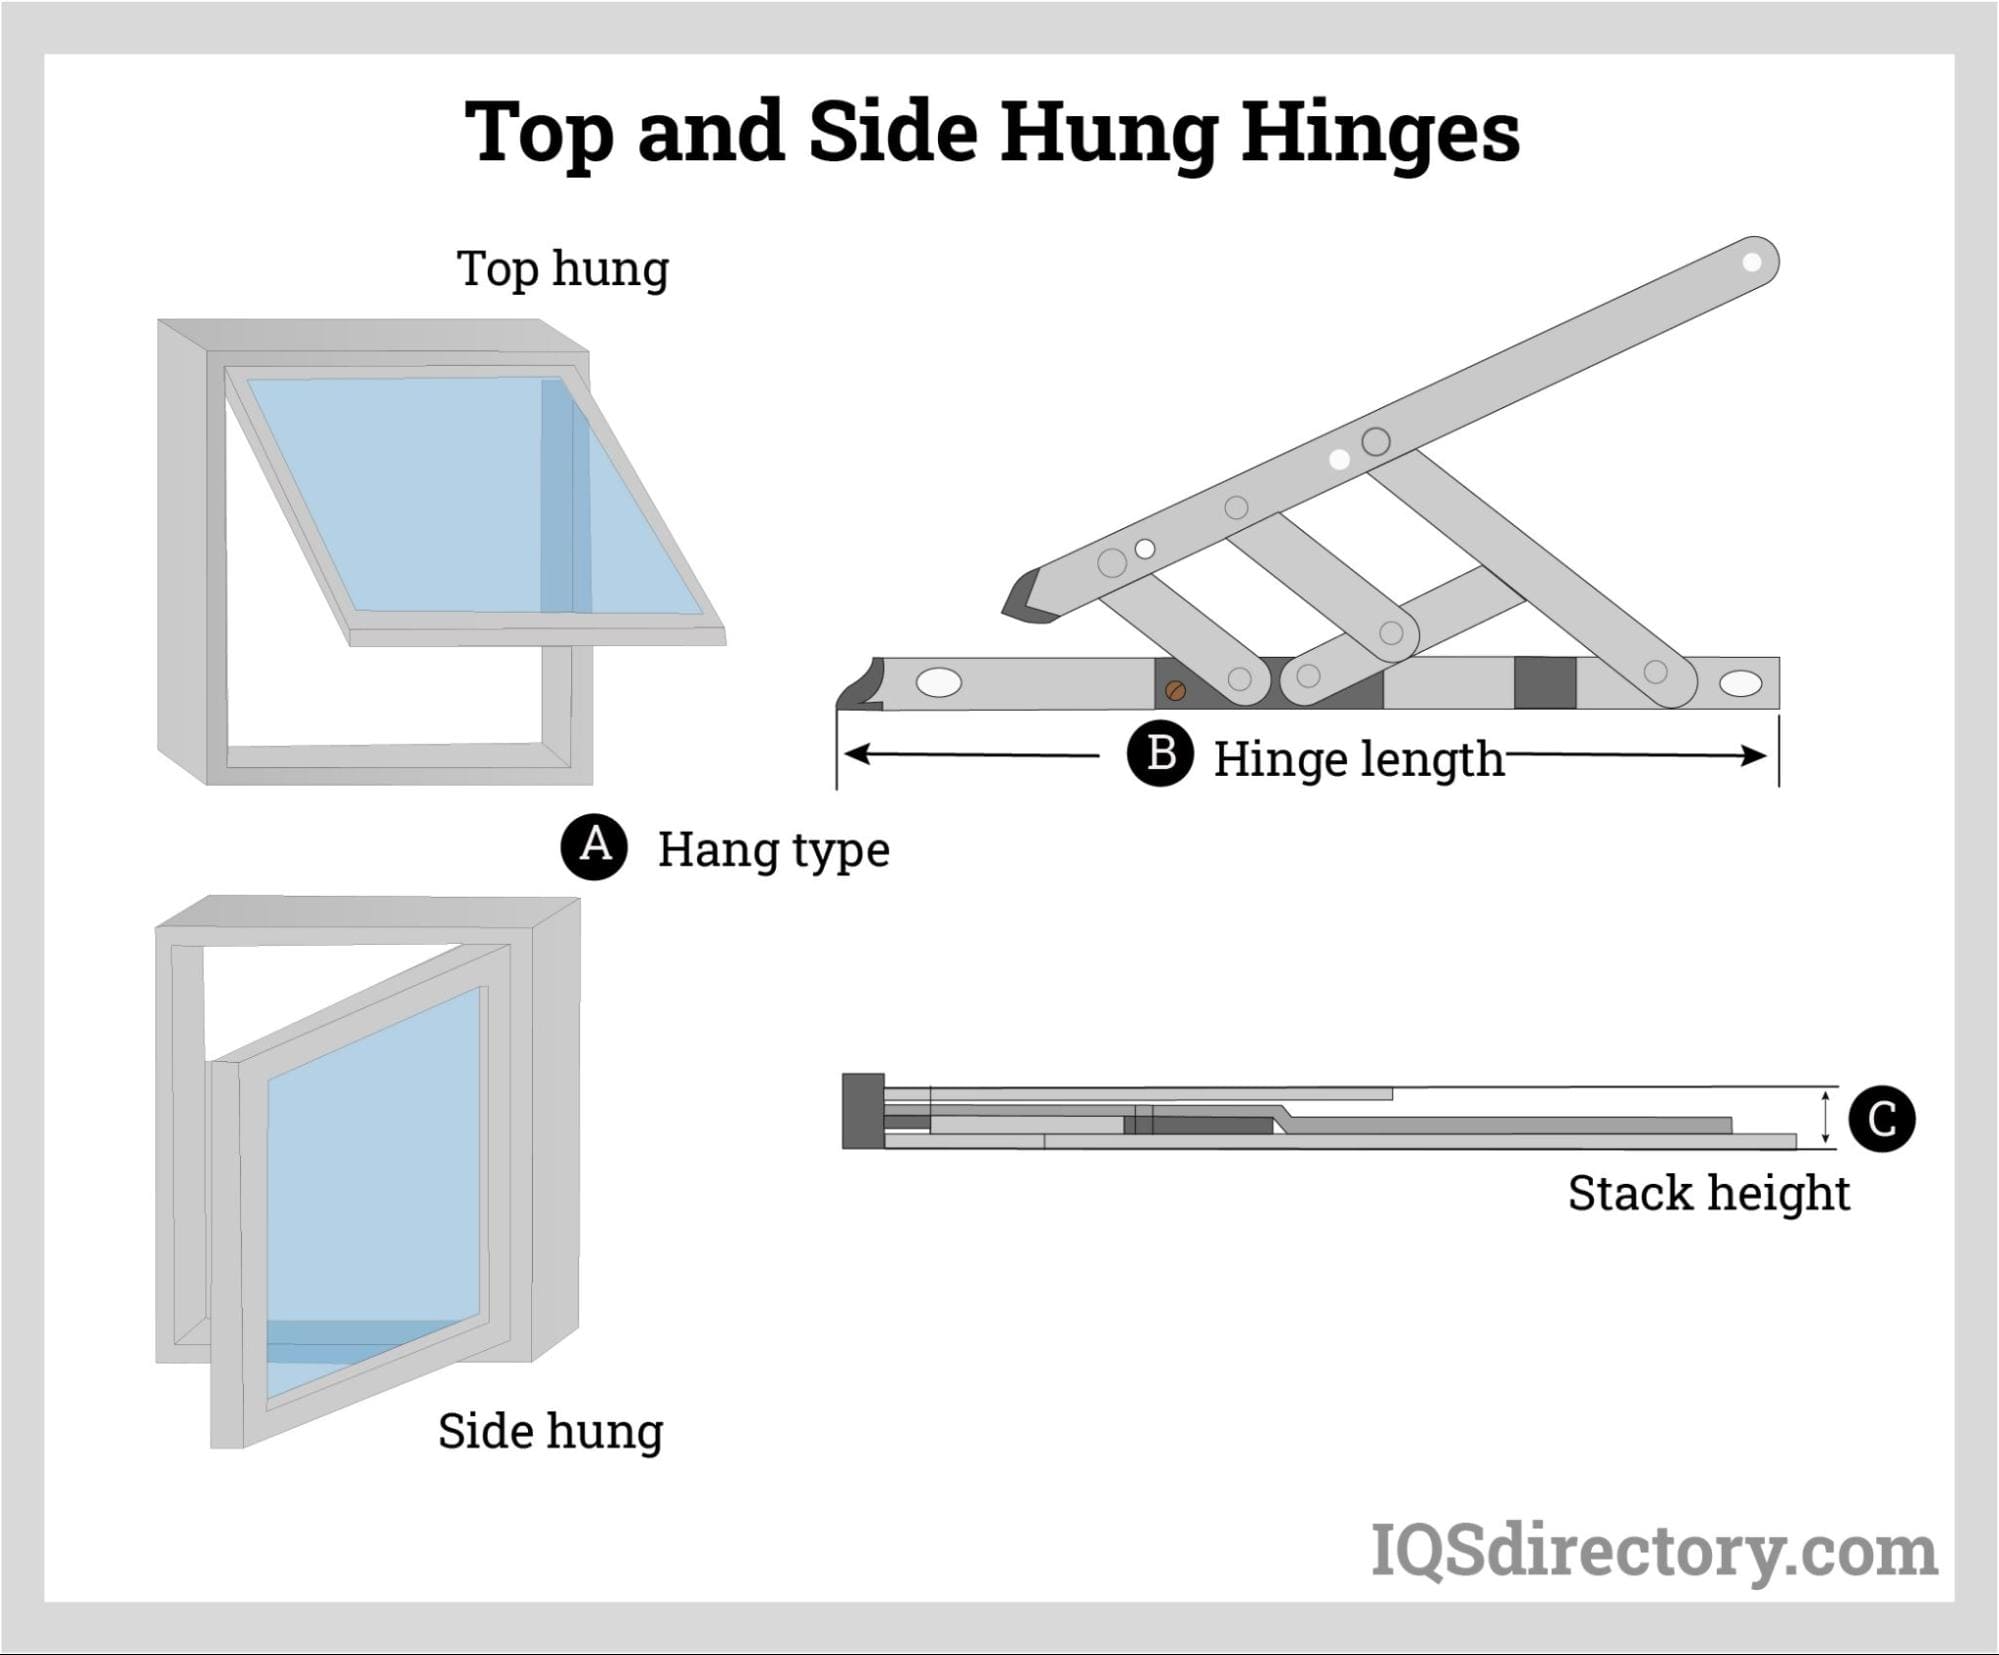 : Top and Side Hung Hinges